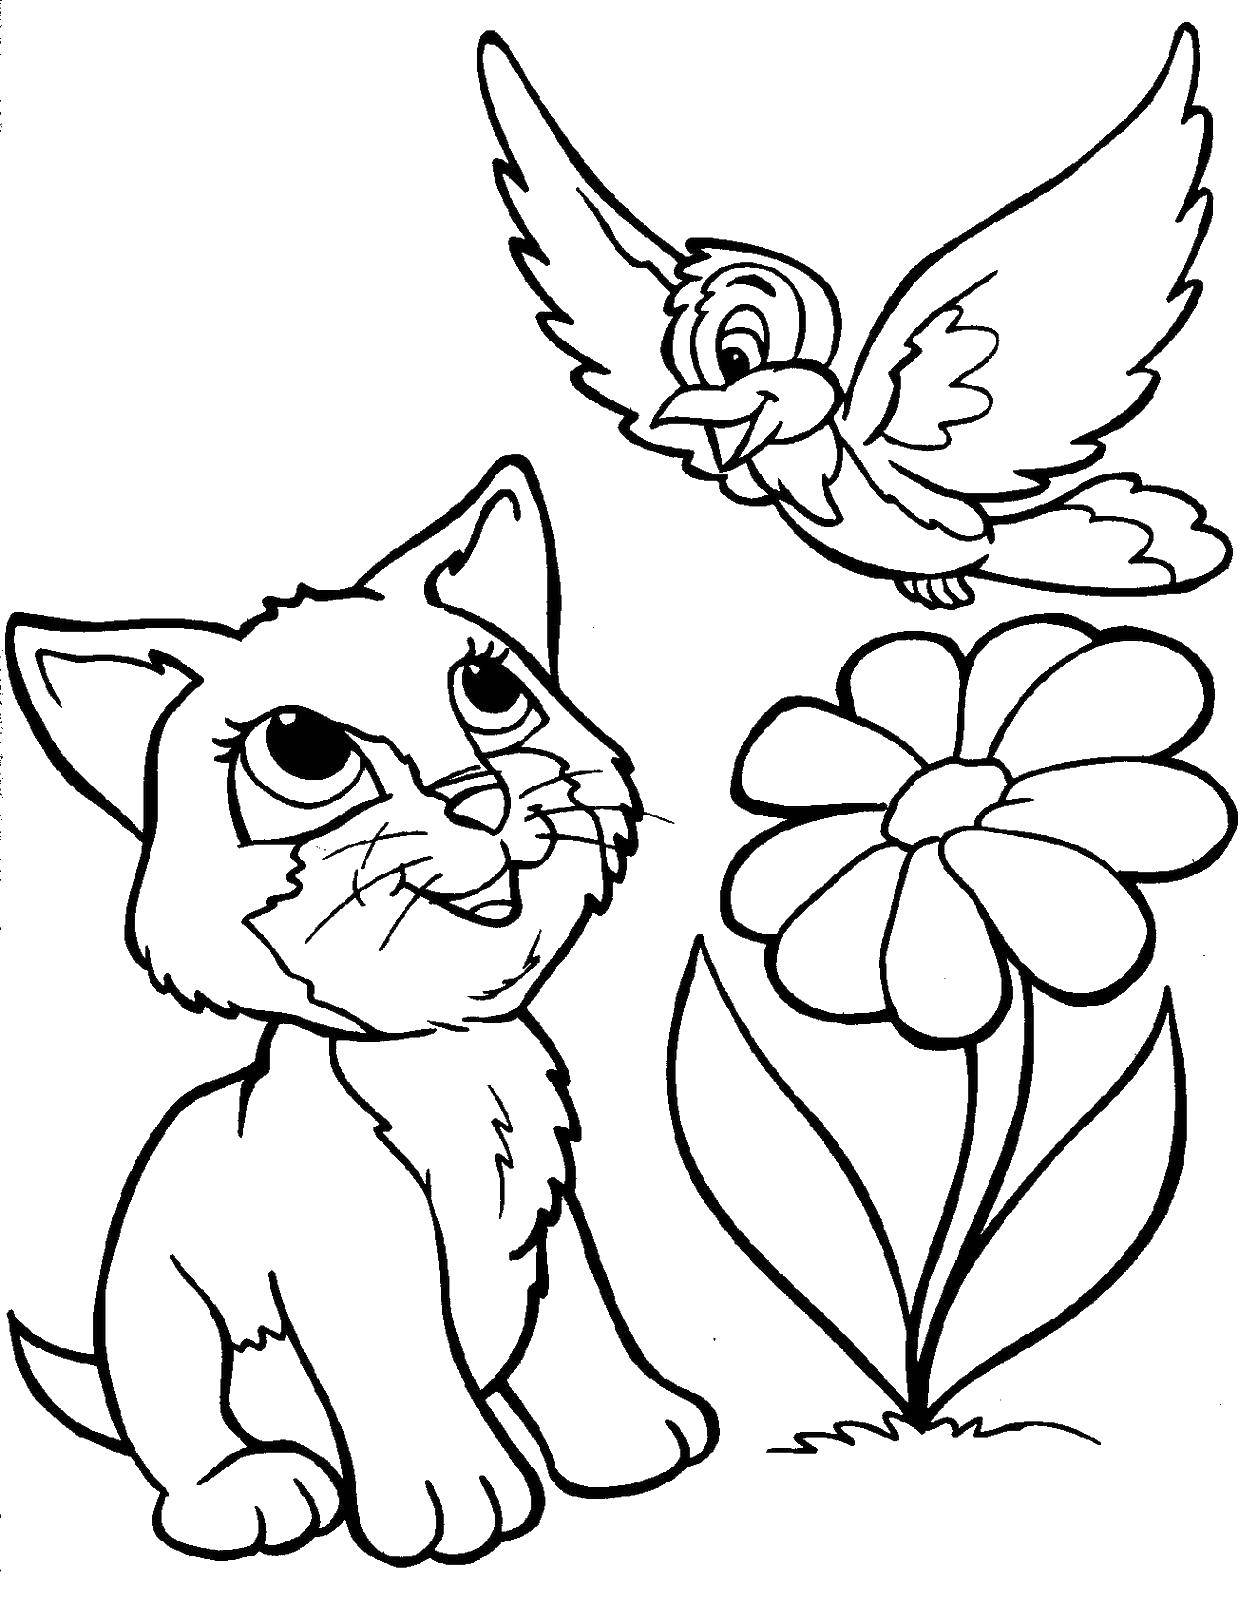 Coloring Kitten and bird. Category Animals. Tags:  kitty, flower, bird.